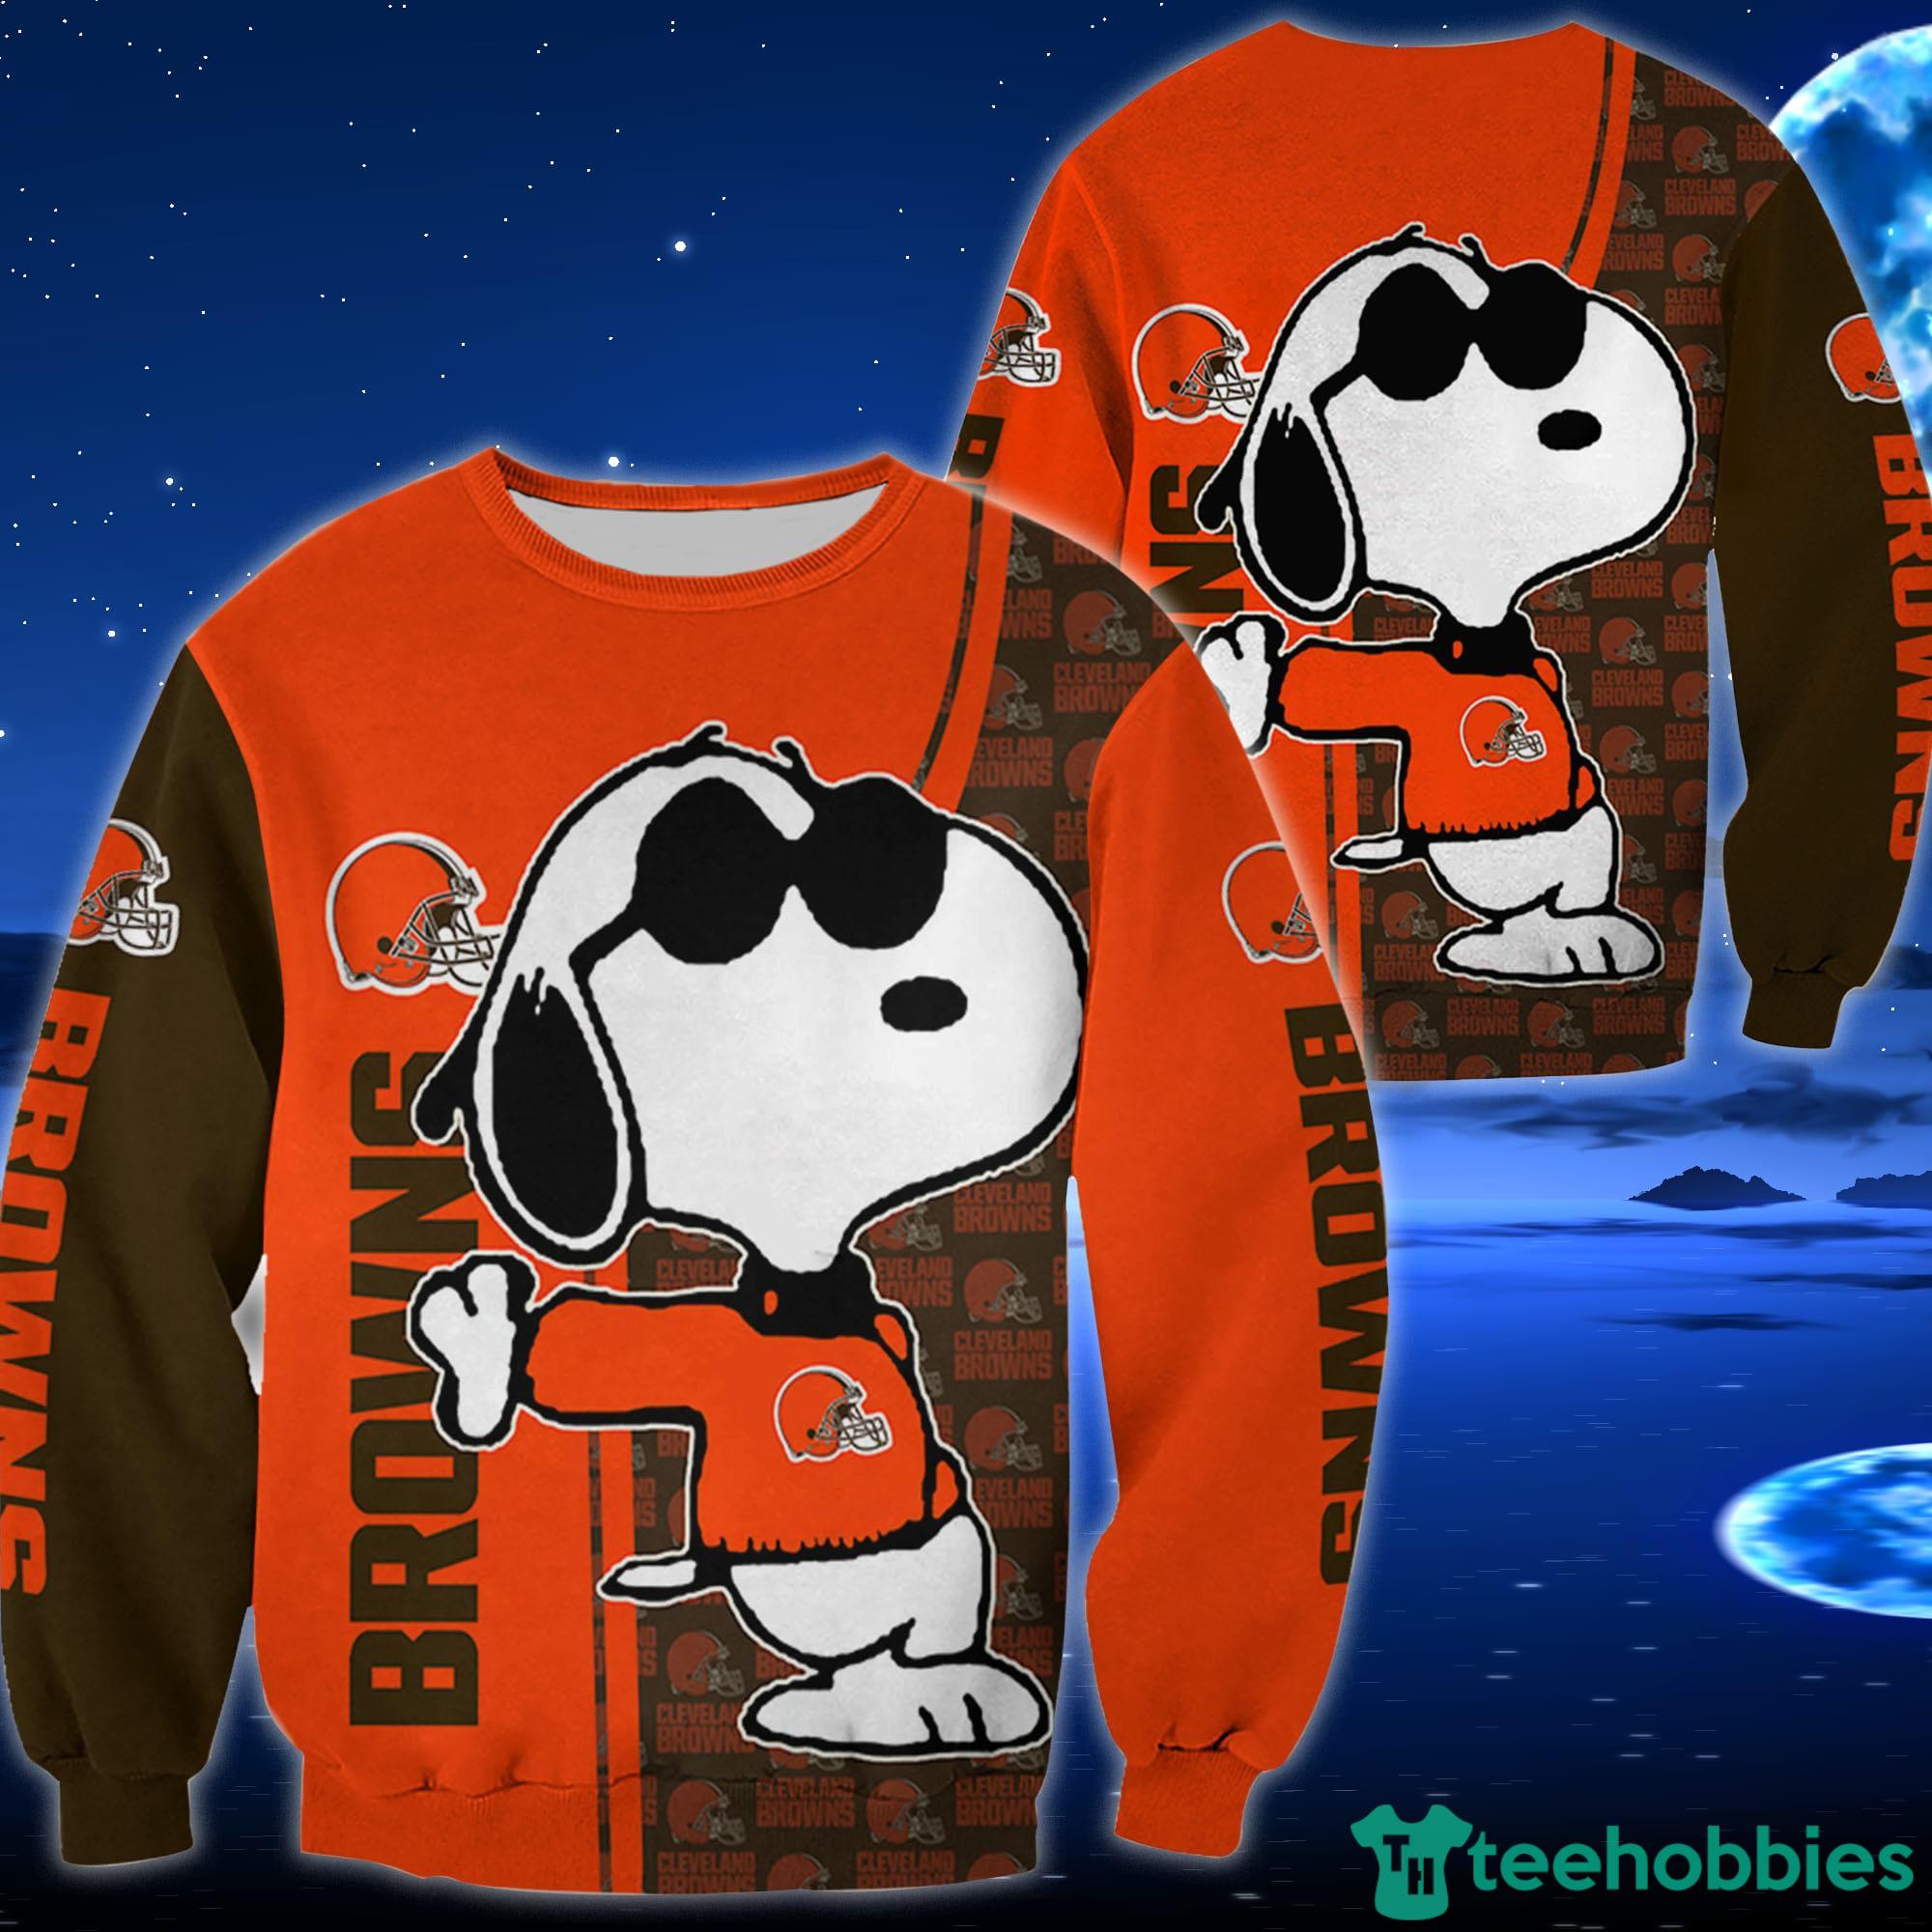 https://image.teehobbies.us/2023/02/cleveland-browns-snoopy-all-over-printed-3d-t-shirt-hoodie-sweatshirt-bomber-for-sport-fans-1.jpg